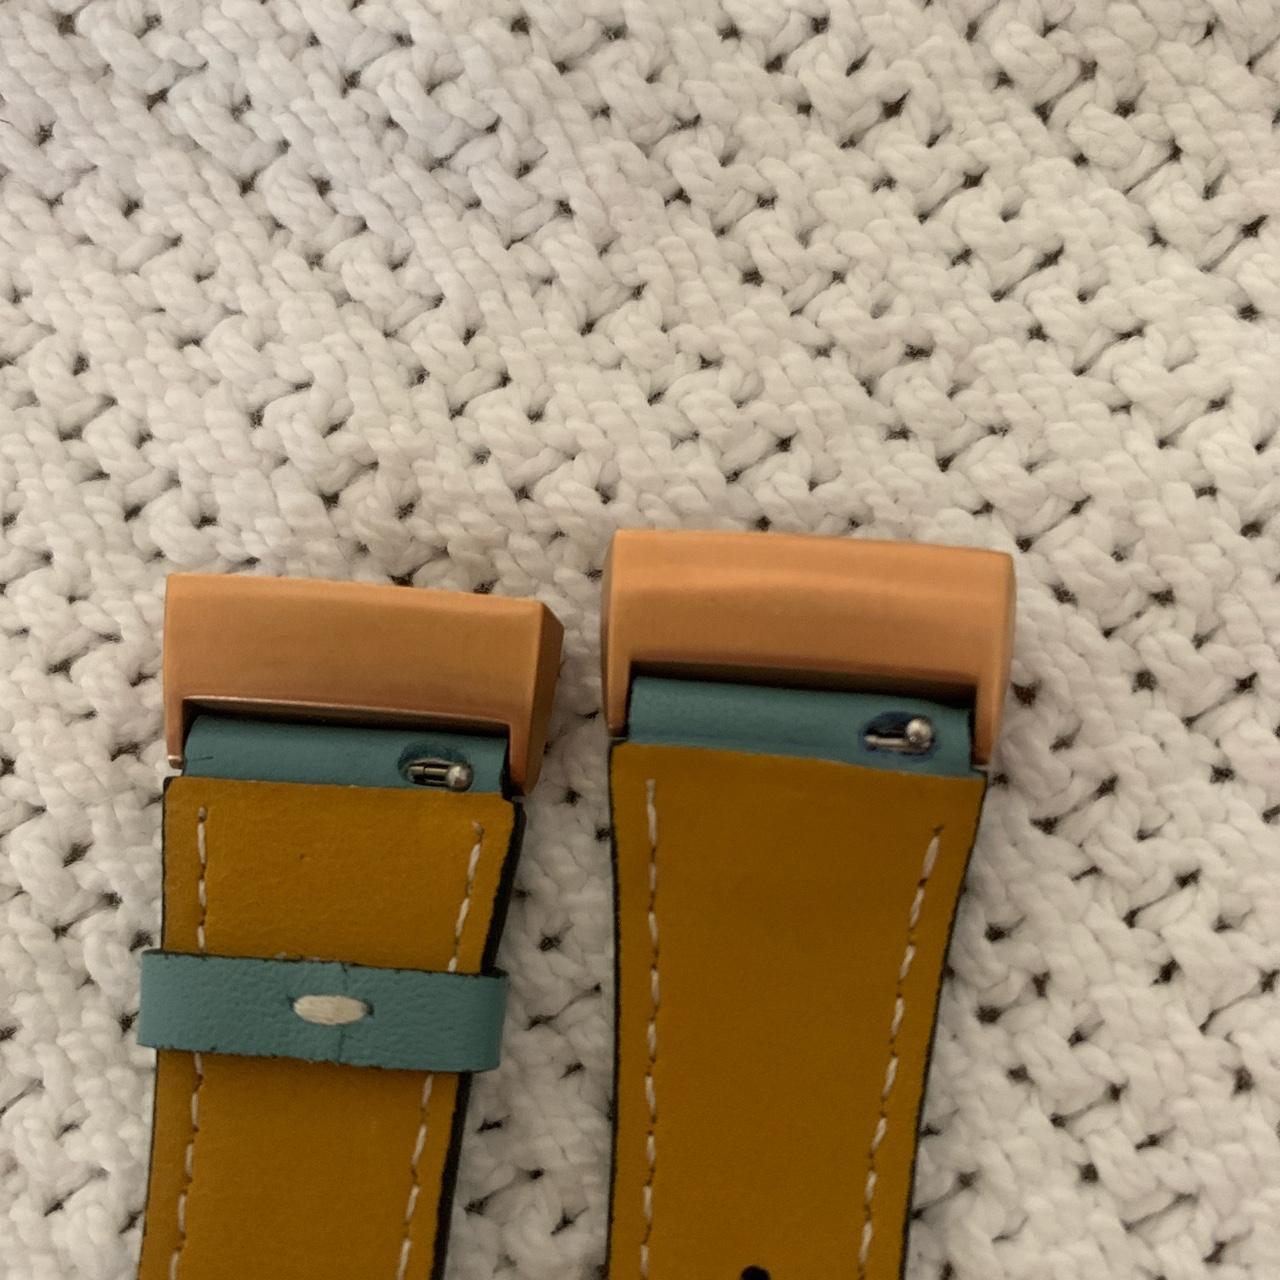 Fitbit Women's Blue and Tan Watch (3)